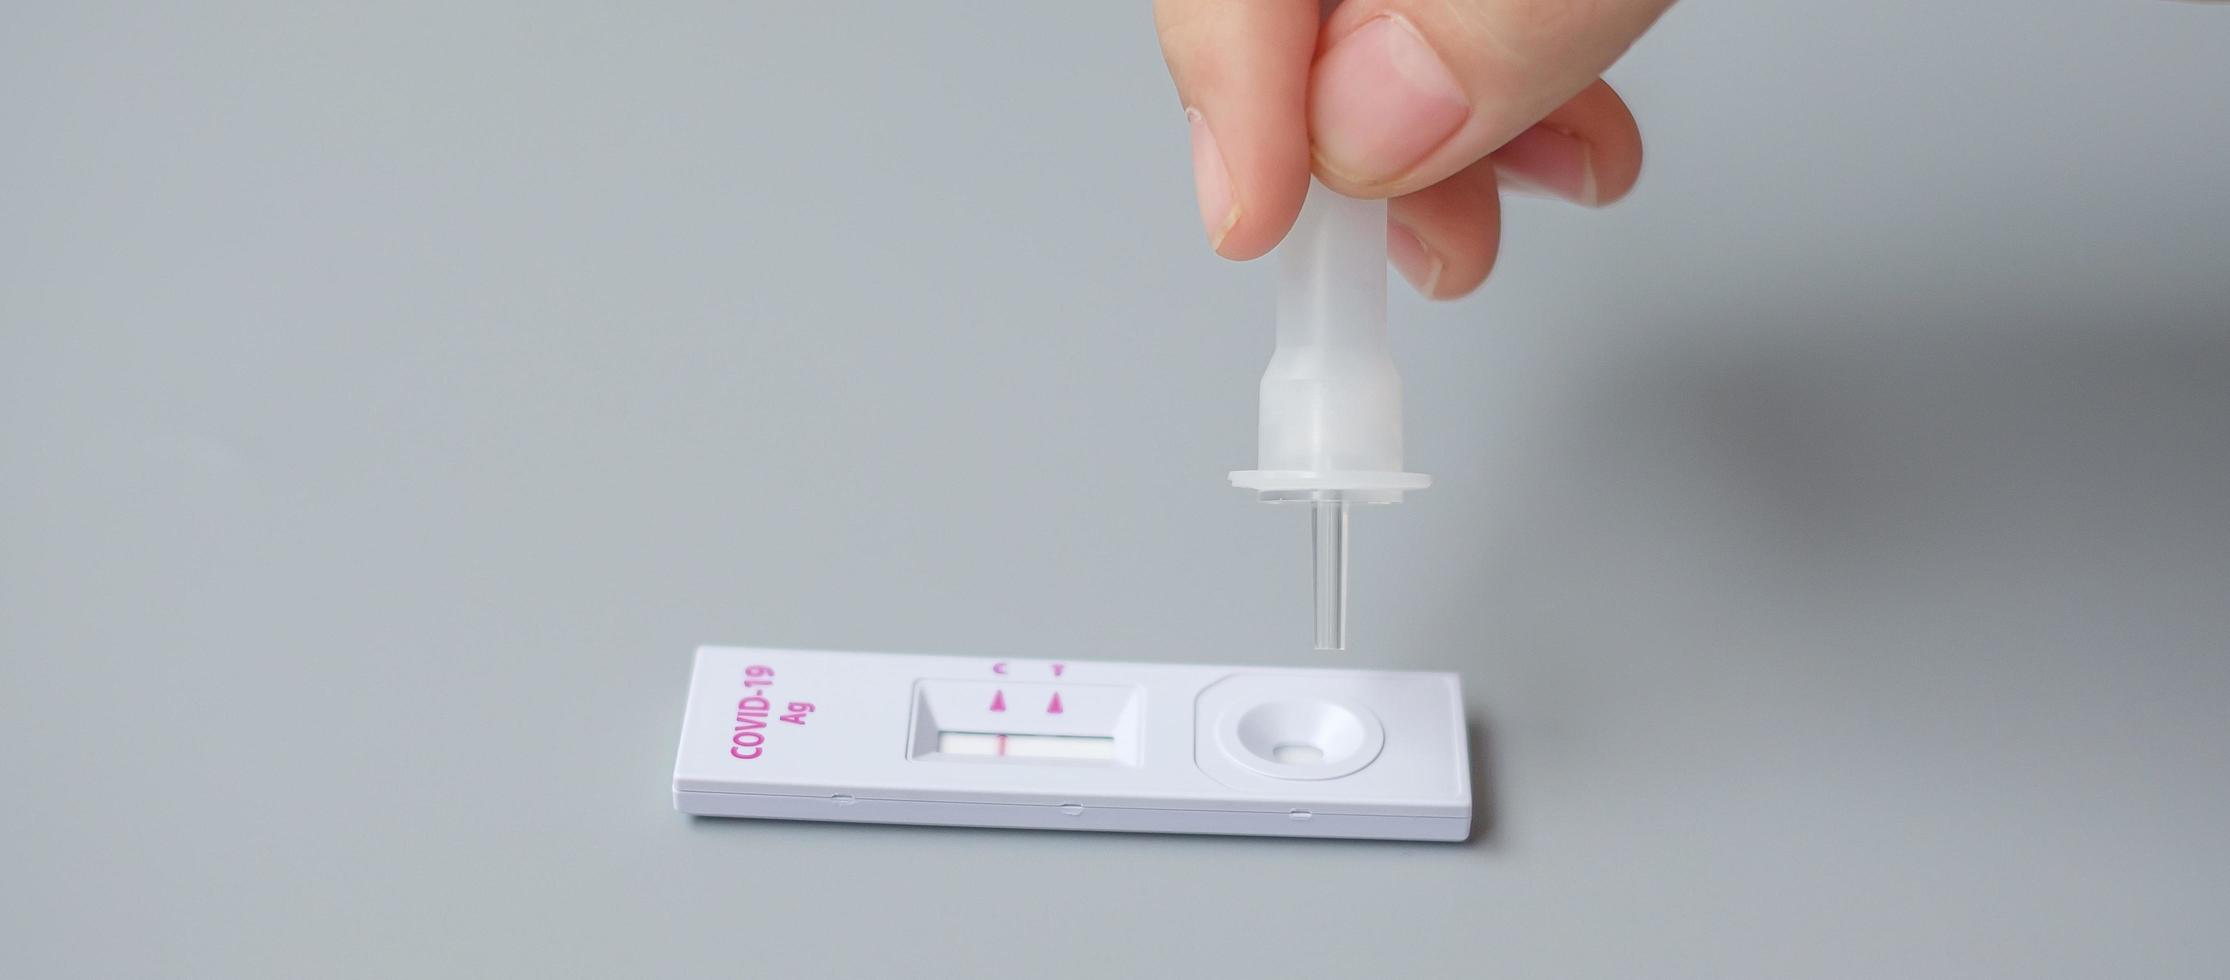 man swab COVID-19 testing by Rapid Antigen Test kit. Coronavirus Self nasal or Home test, Lockdown and Home Isolation concept photo